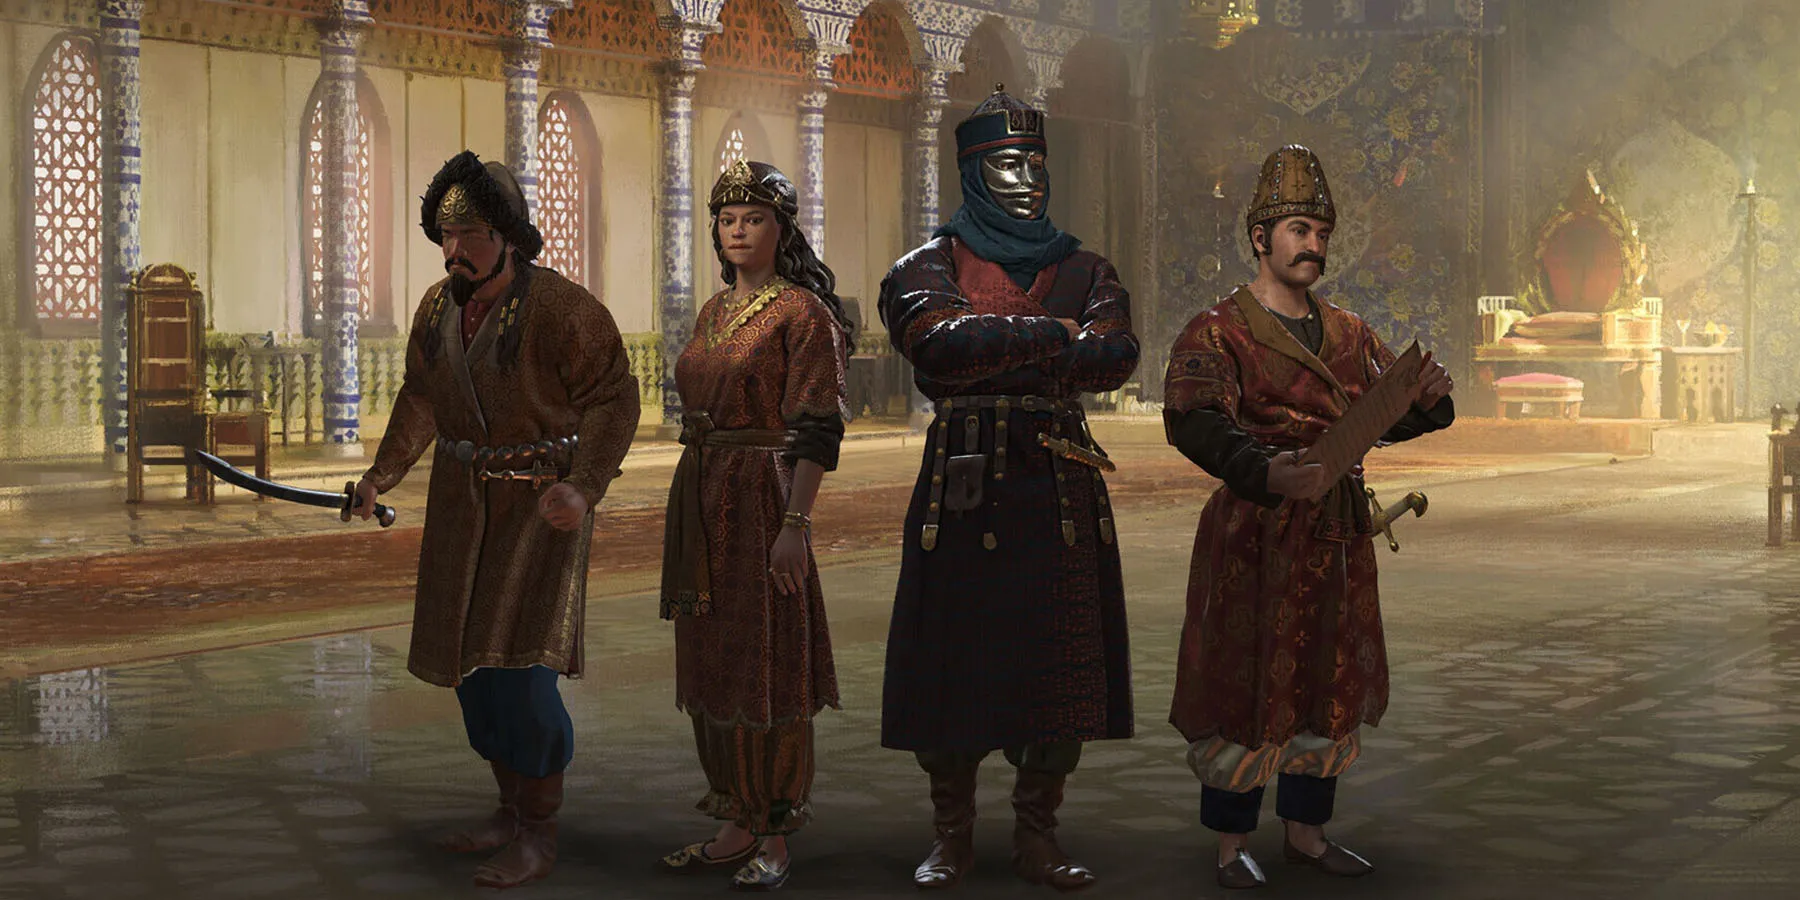 Some characters in Crusader Kings 3